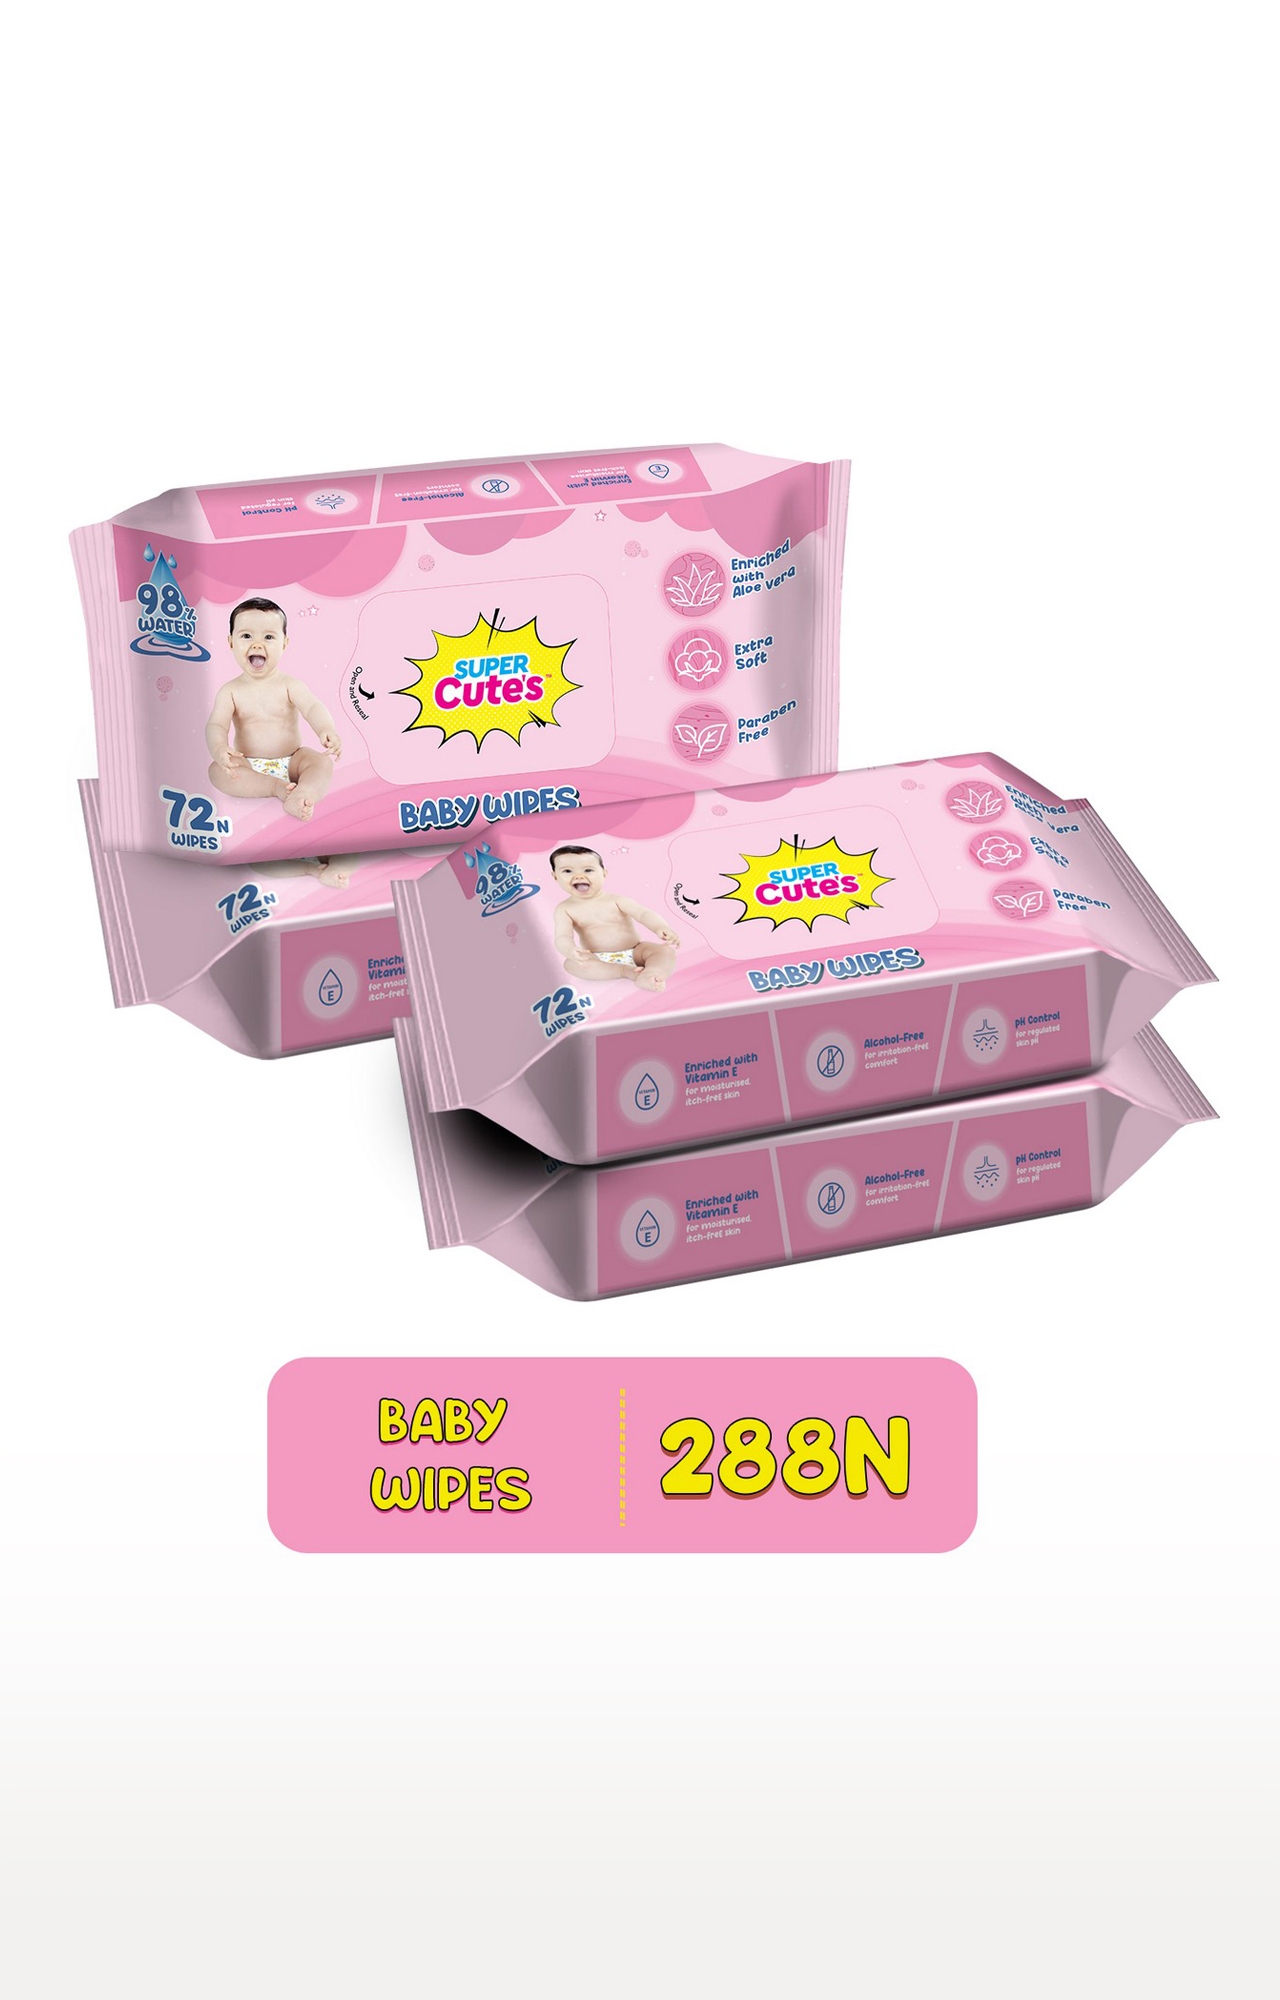 Super Cute's | Super Cute's Premium Soft Cleansing Baby Wipes With Aloe Vera, Enriched With Vitamin E, And Paraben Free - 72 Wipes (Combo Of 4)